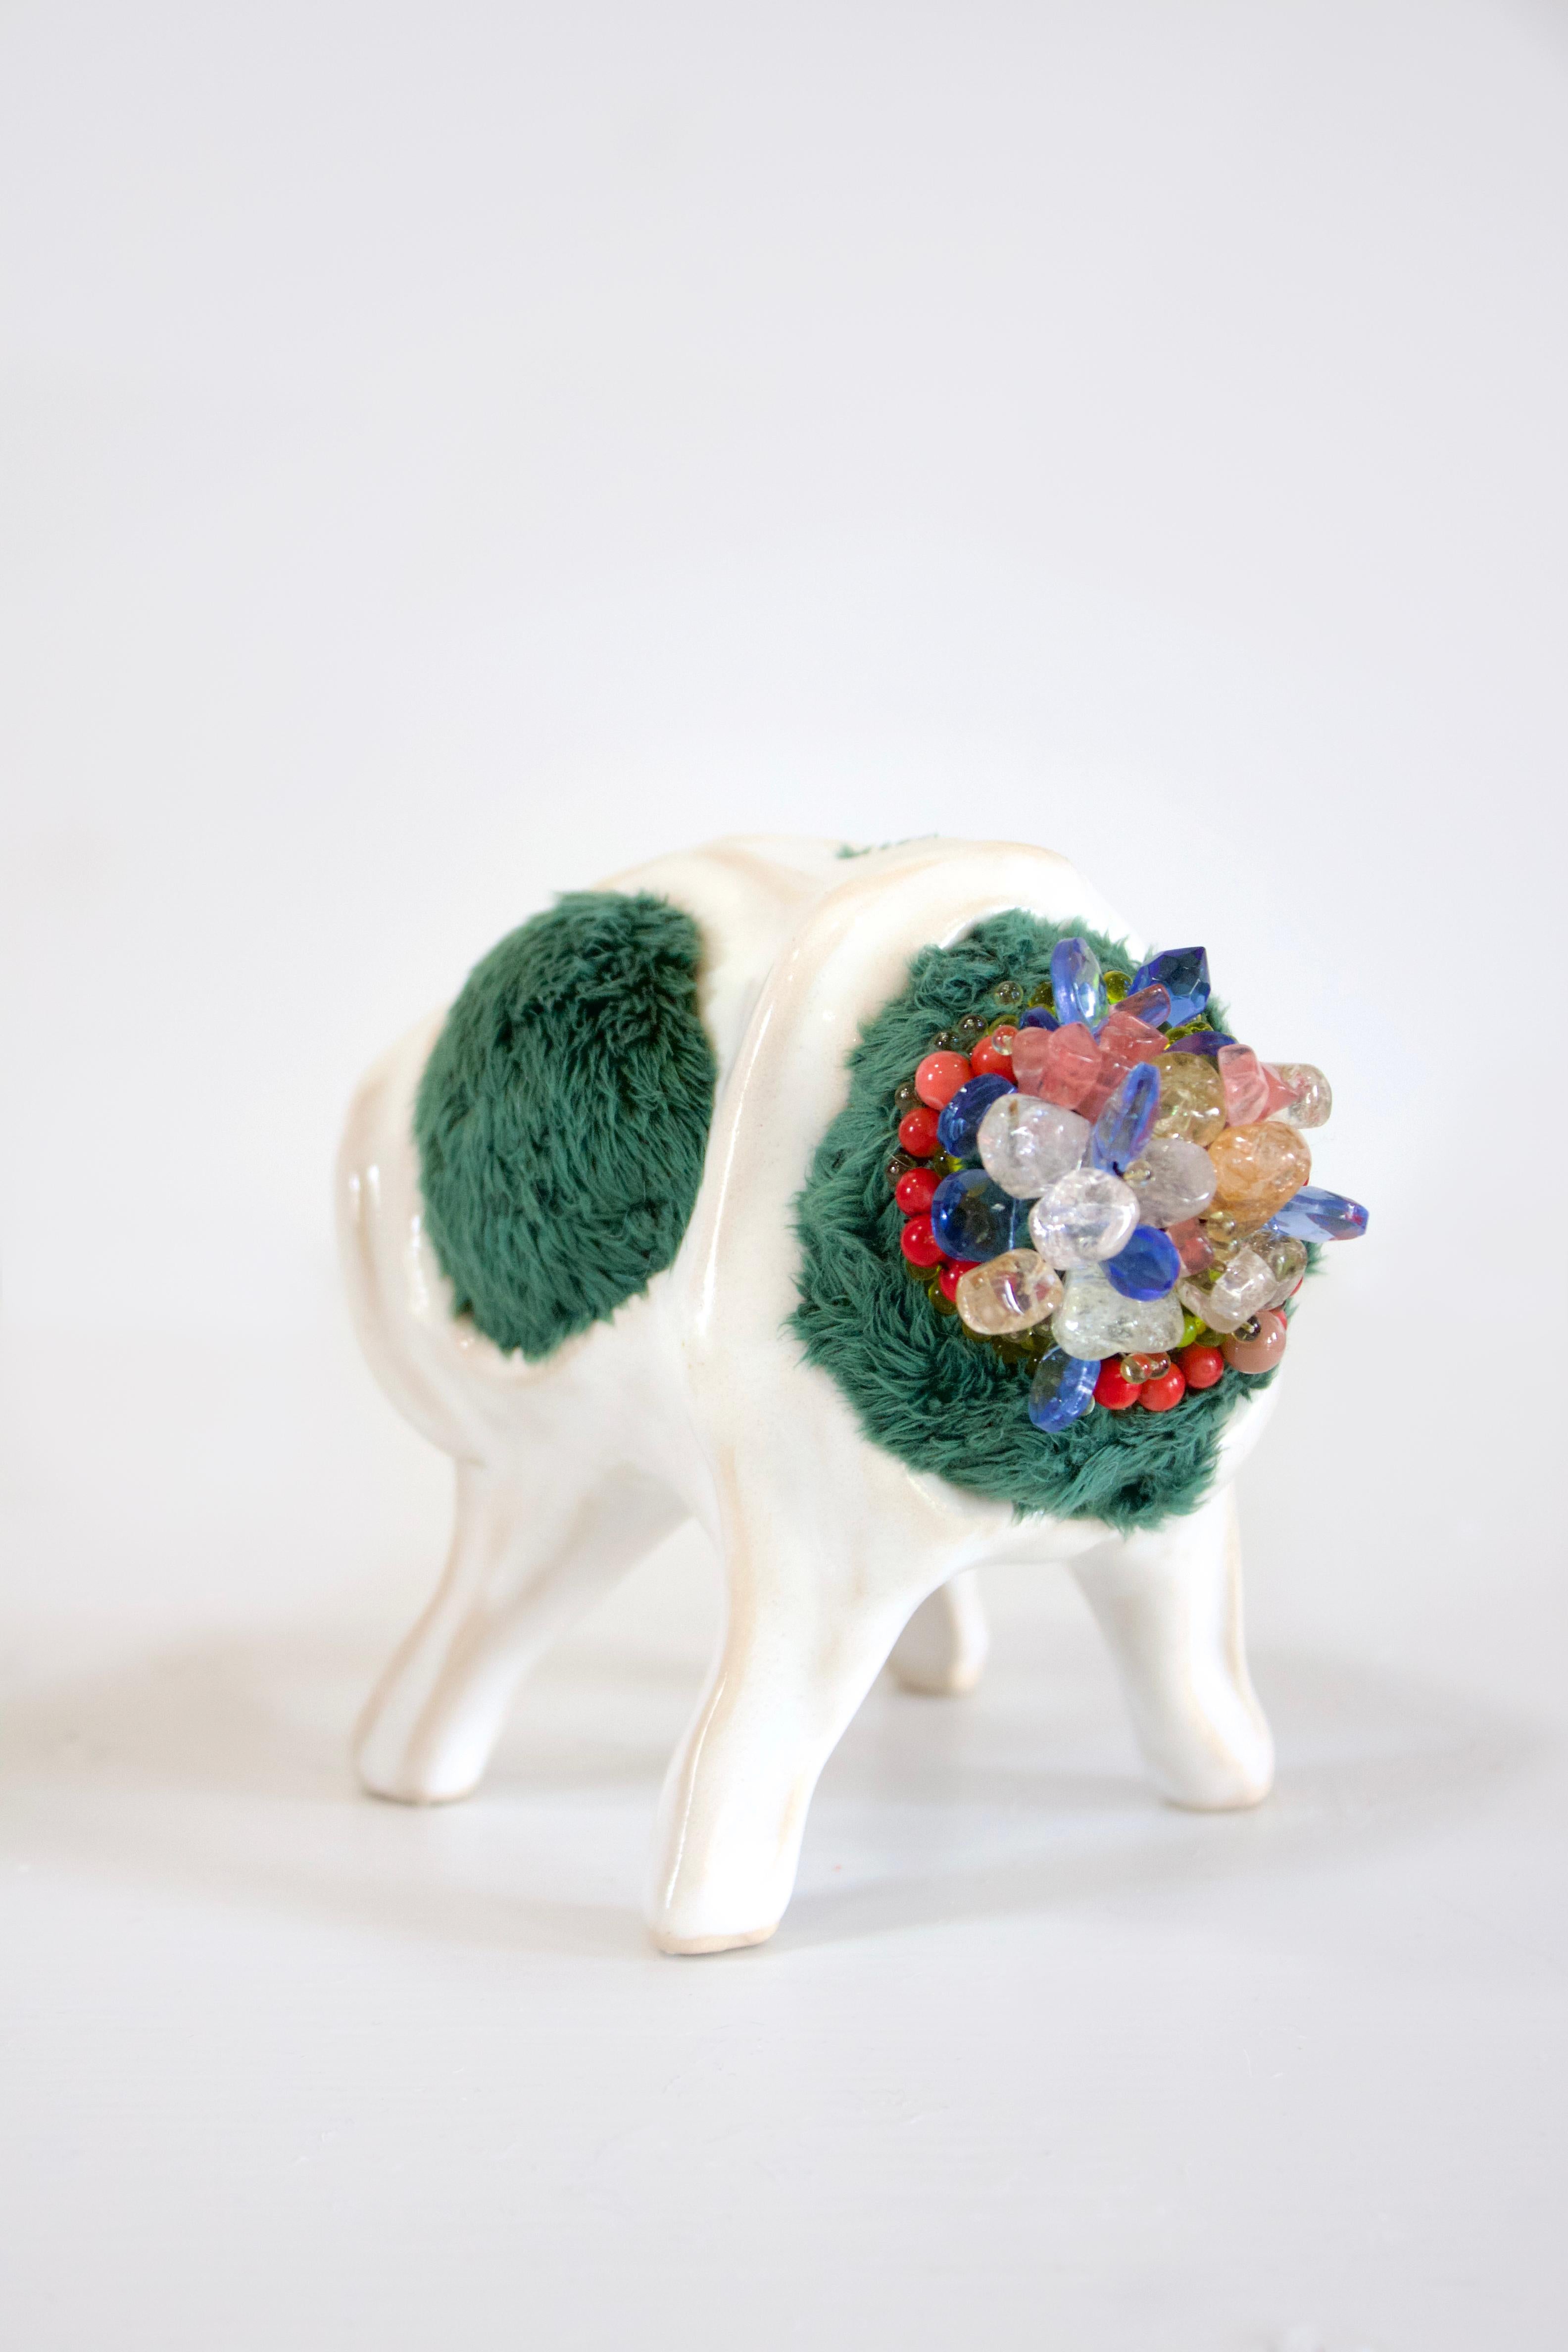 Hanna Washburn Abstract Sculpture - Moss Body, textile, patterned, pink, red, blue, green, organic, ceramic, white